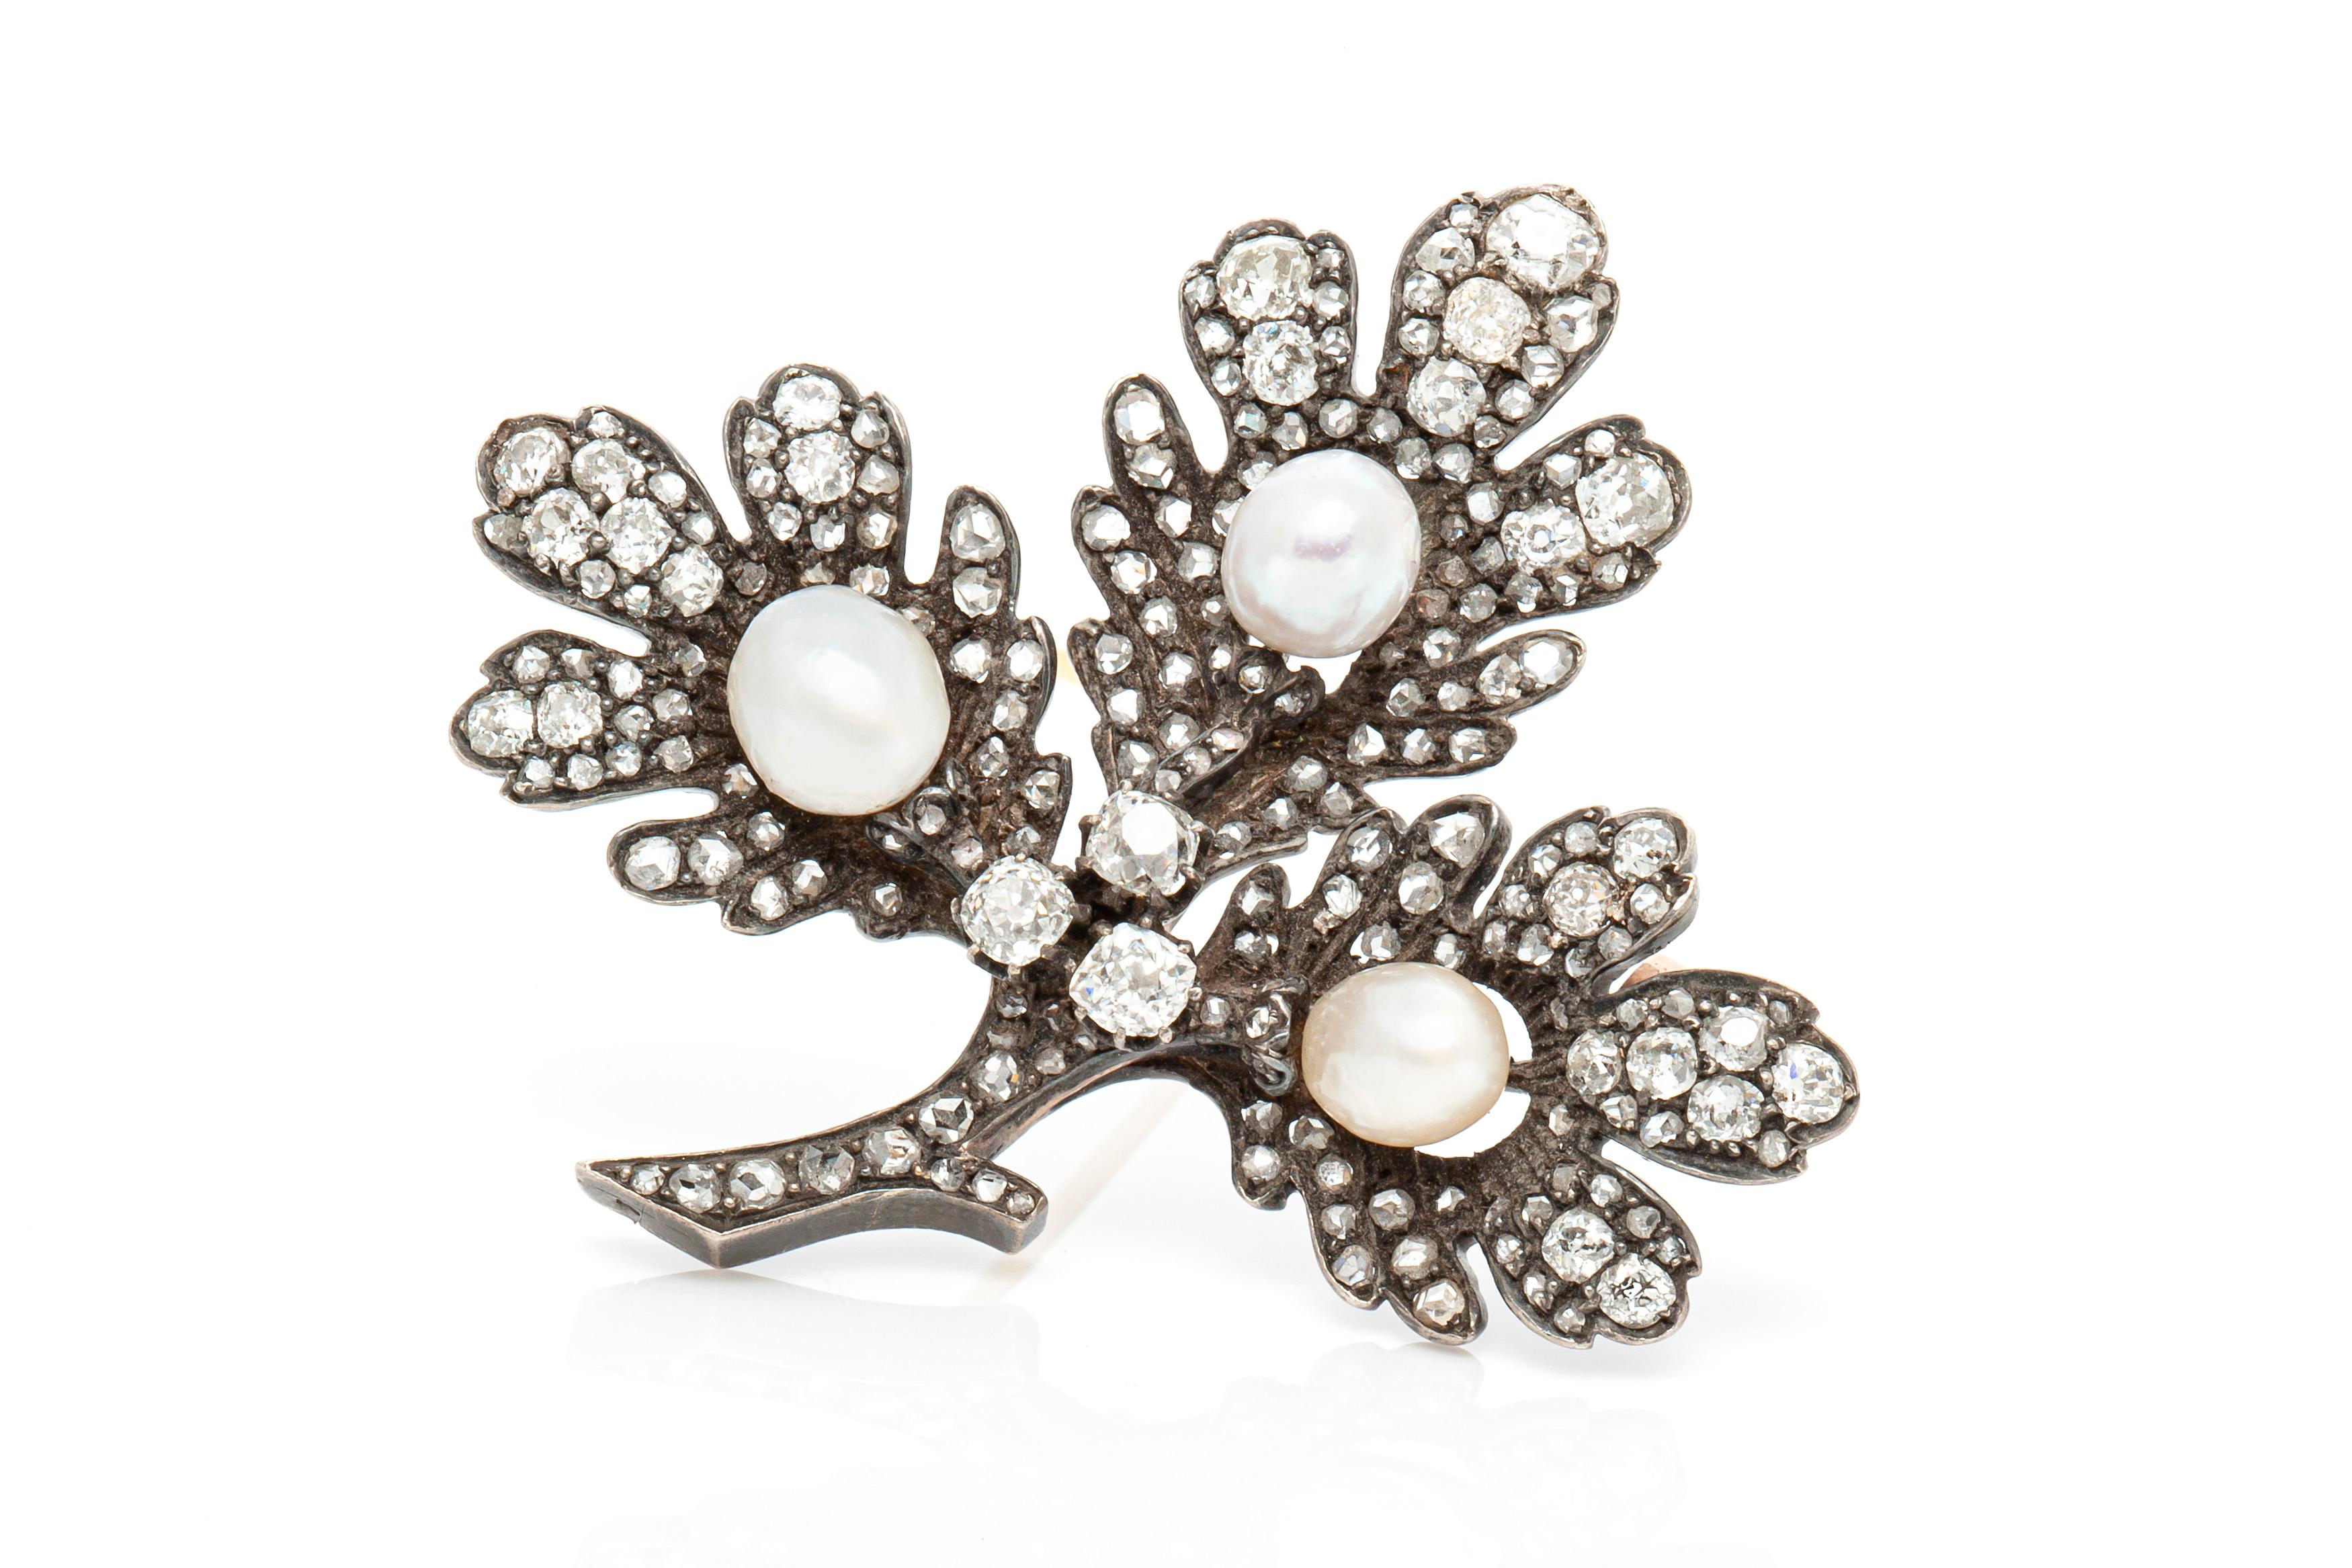 The brooch is finely crafted in silver and gold with pearls and diamonds weighing approximately total of 9.50 carat.
